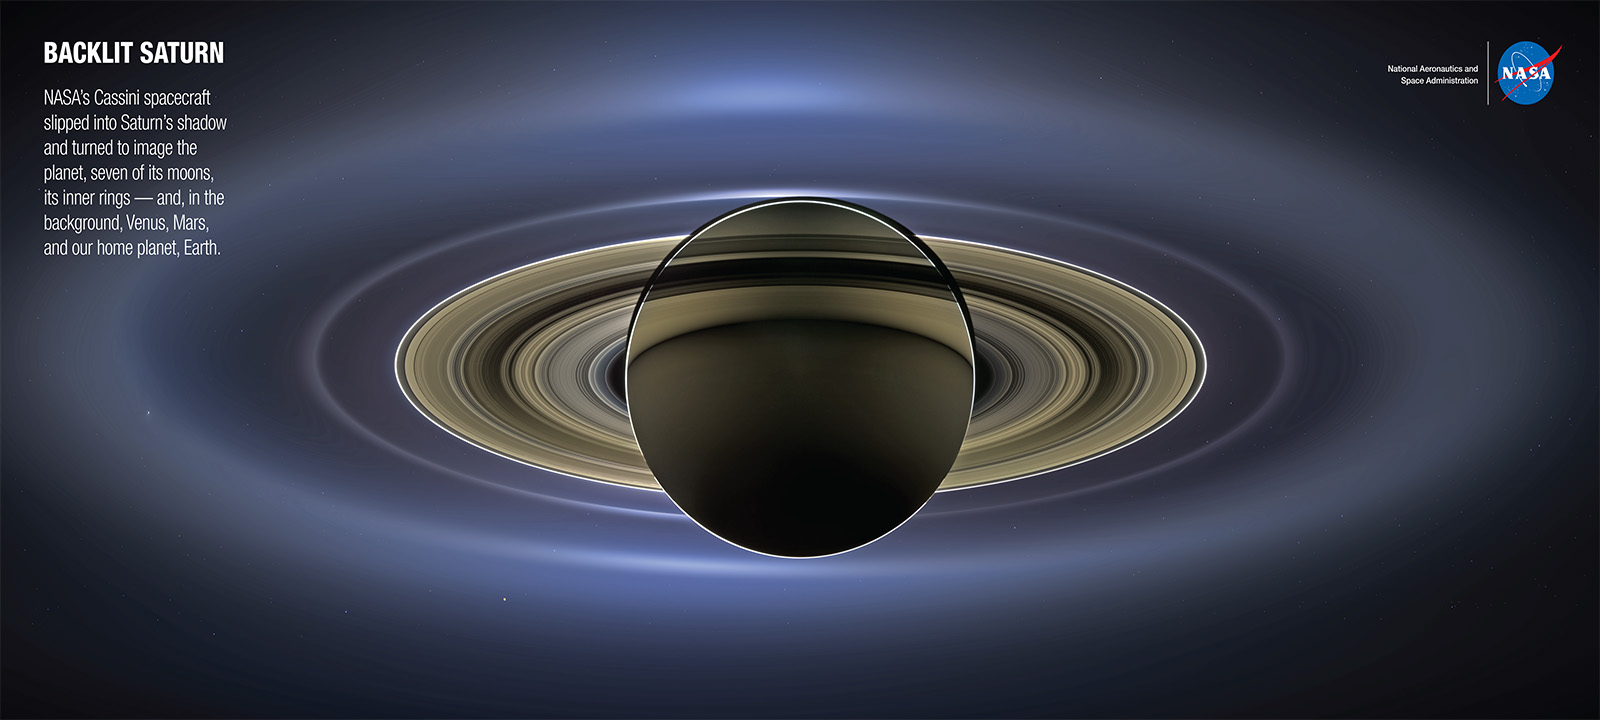 Poster-sized image of Saturn illuminated by the sun from behind.